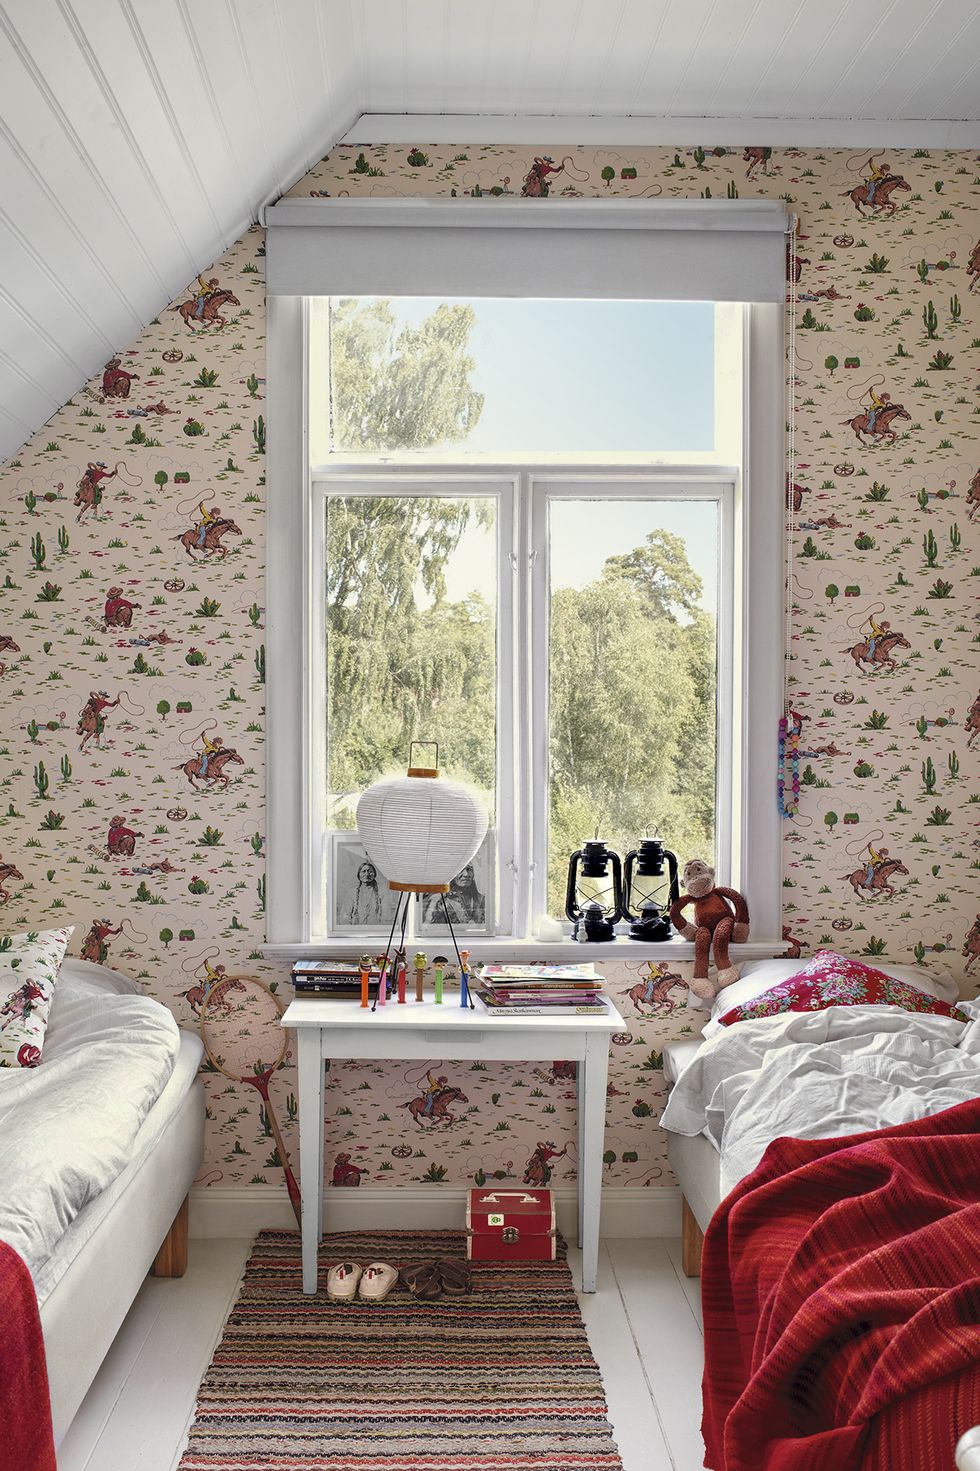 Children's bedroom with two twin beds and decorative wallpaper